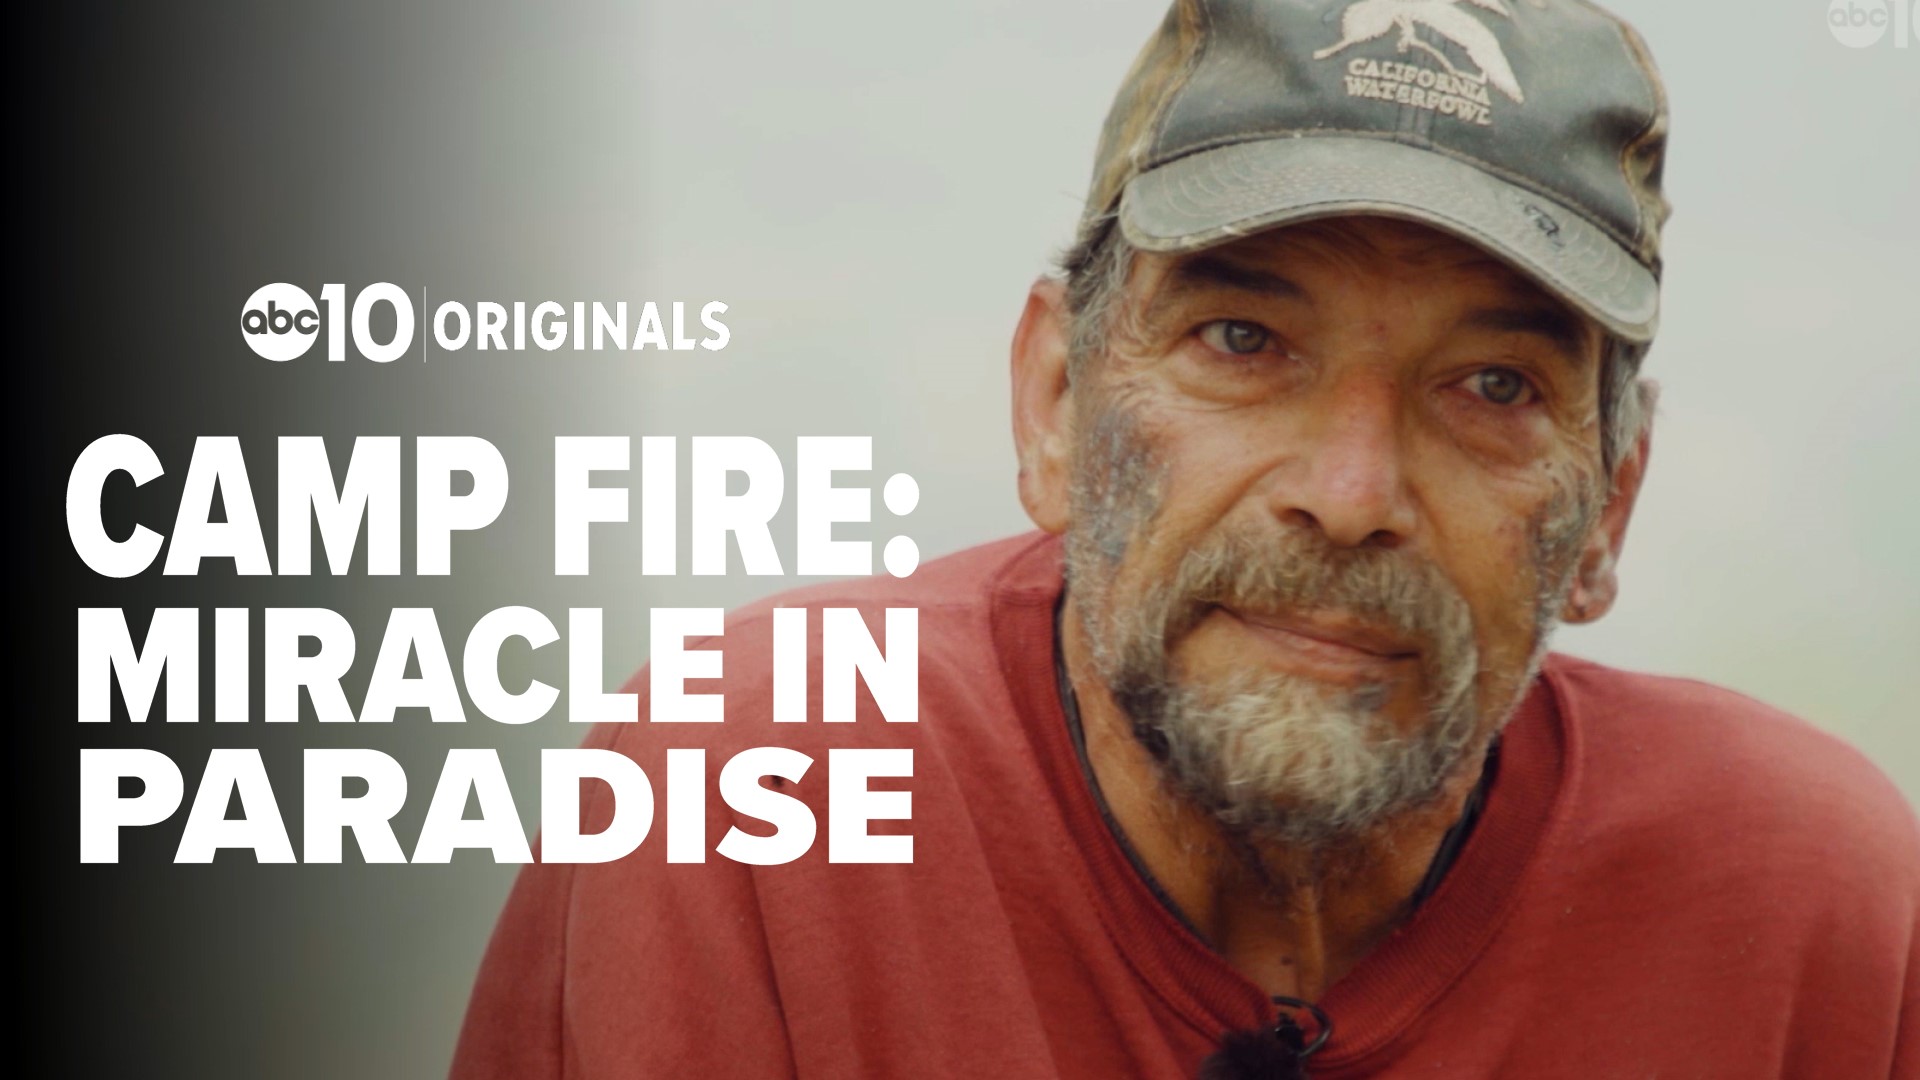 Bill Roth had been homeless once, and he wasn't going to let the Camp Fire take away his house. To save it, he had to face hell itself.